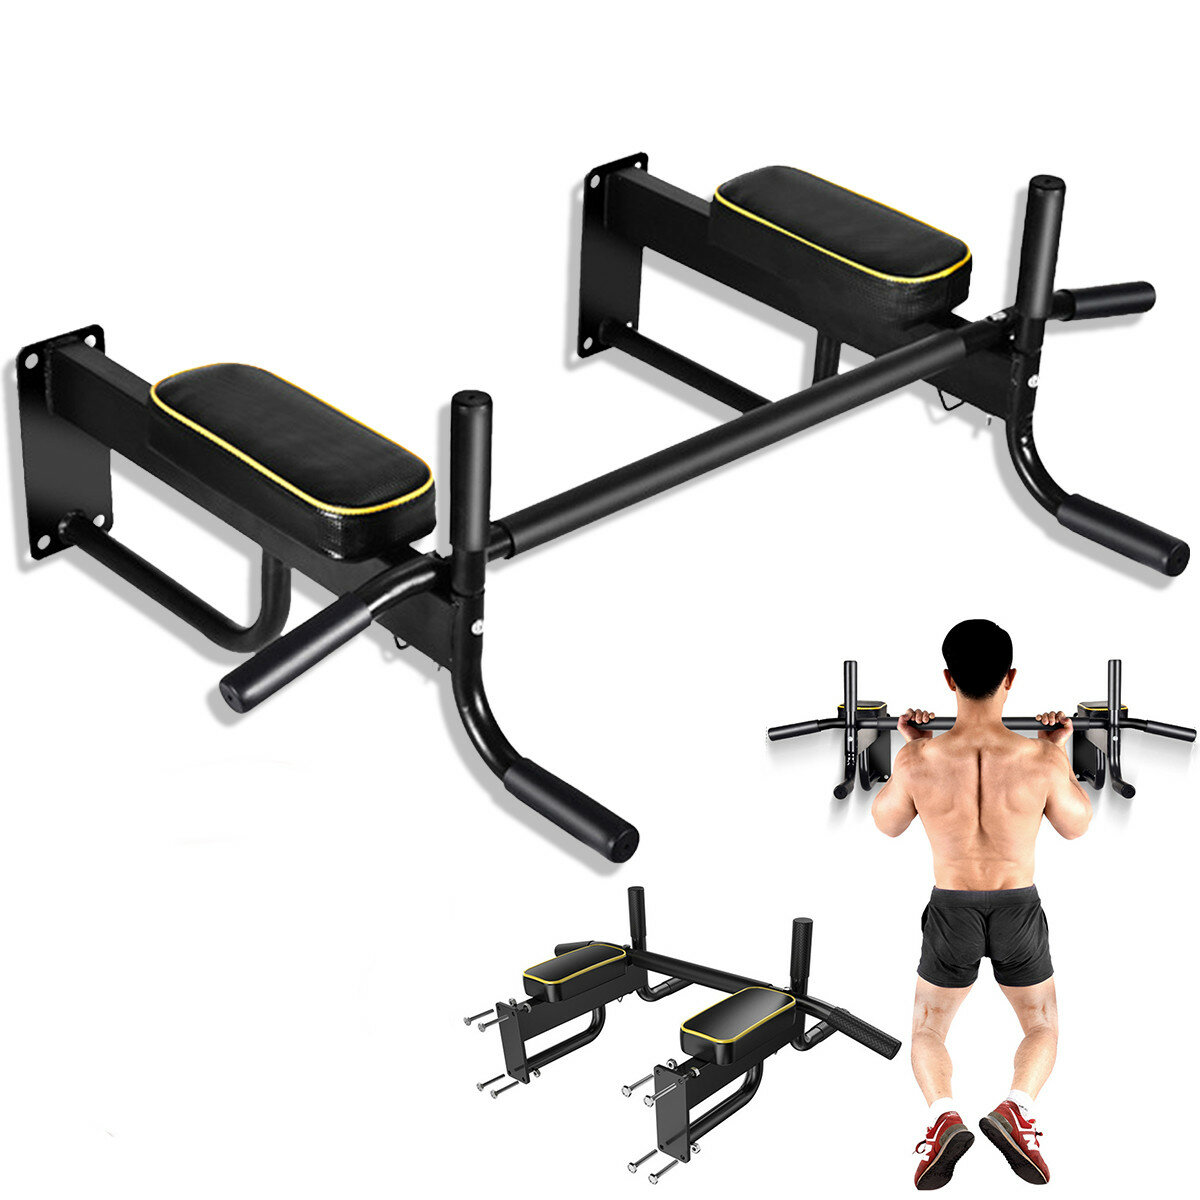 Multi-function Pull Up Bar Chin Gym Door Doorway Muscle Fitness Power Exercise Station